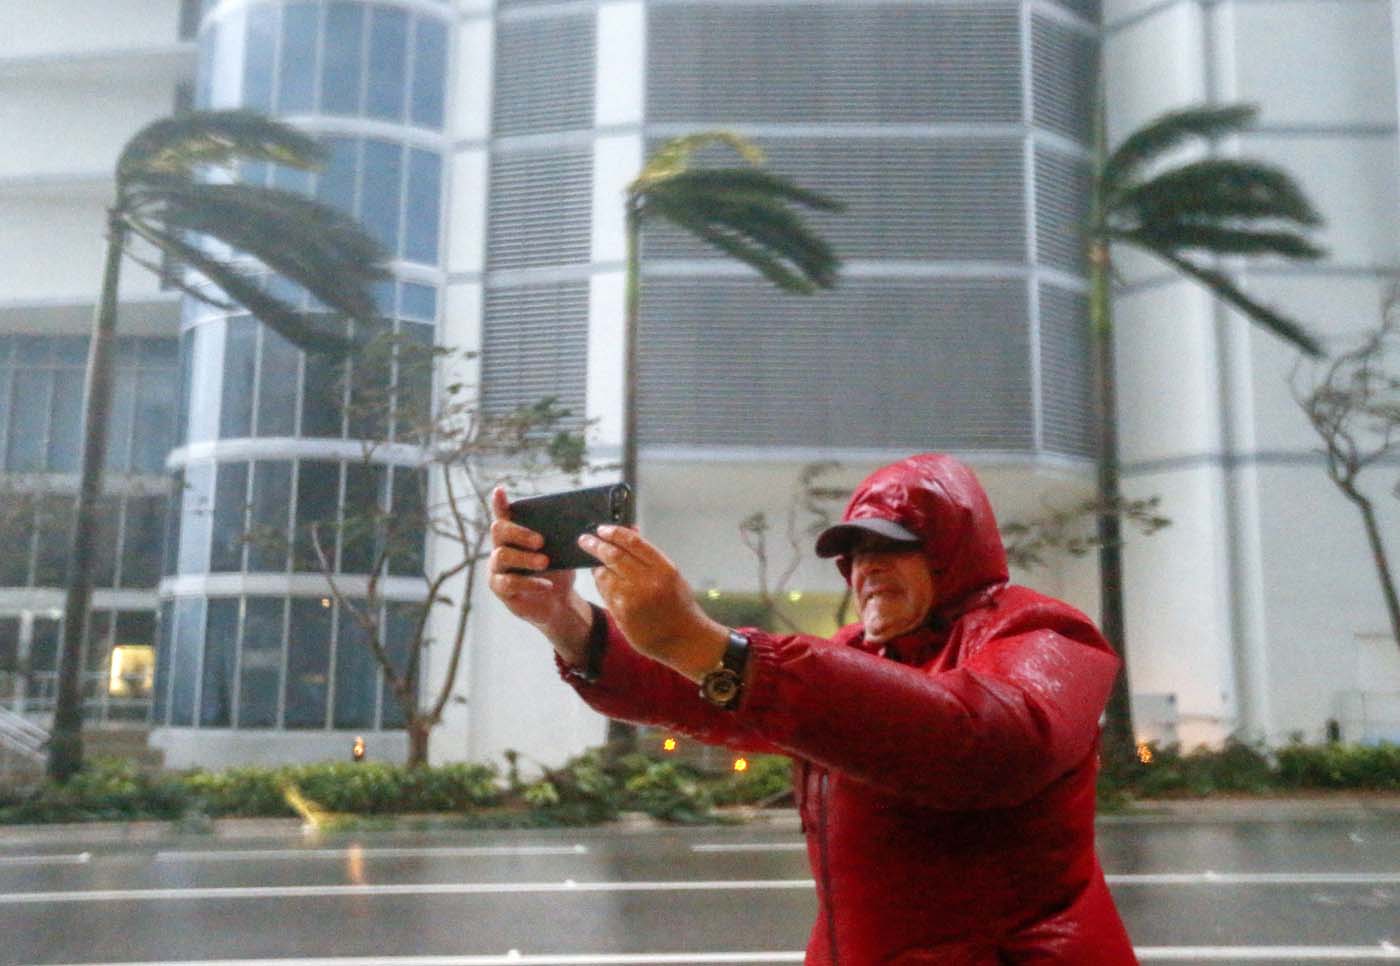 ELX01. Miami (United States), 10/09/2017.- A person photographs the fierce winds with his mobile phone as the full effects of Hurricane Irma strike in Miami, Florida, USA, 10 September 2017. Many areas are under mandatory evacuation orders as Irma approaches Florida. The National Hurricane Center has rated Irma as a Category 4 storm as the eye crosses the lower Florida Keys. (Estados Unidos) EFE/EPA/ERIK S. LESSER